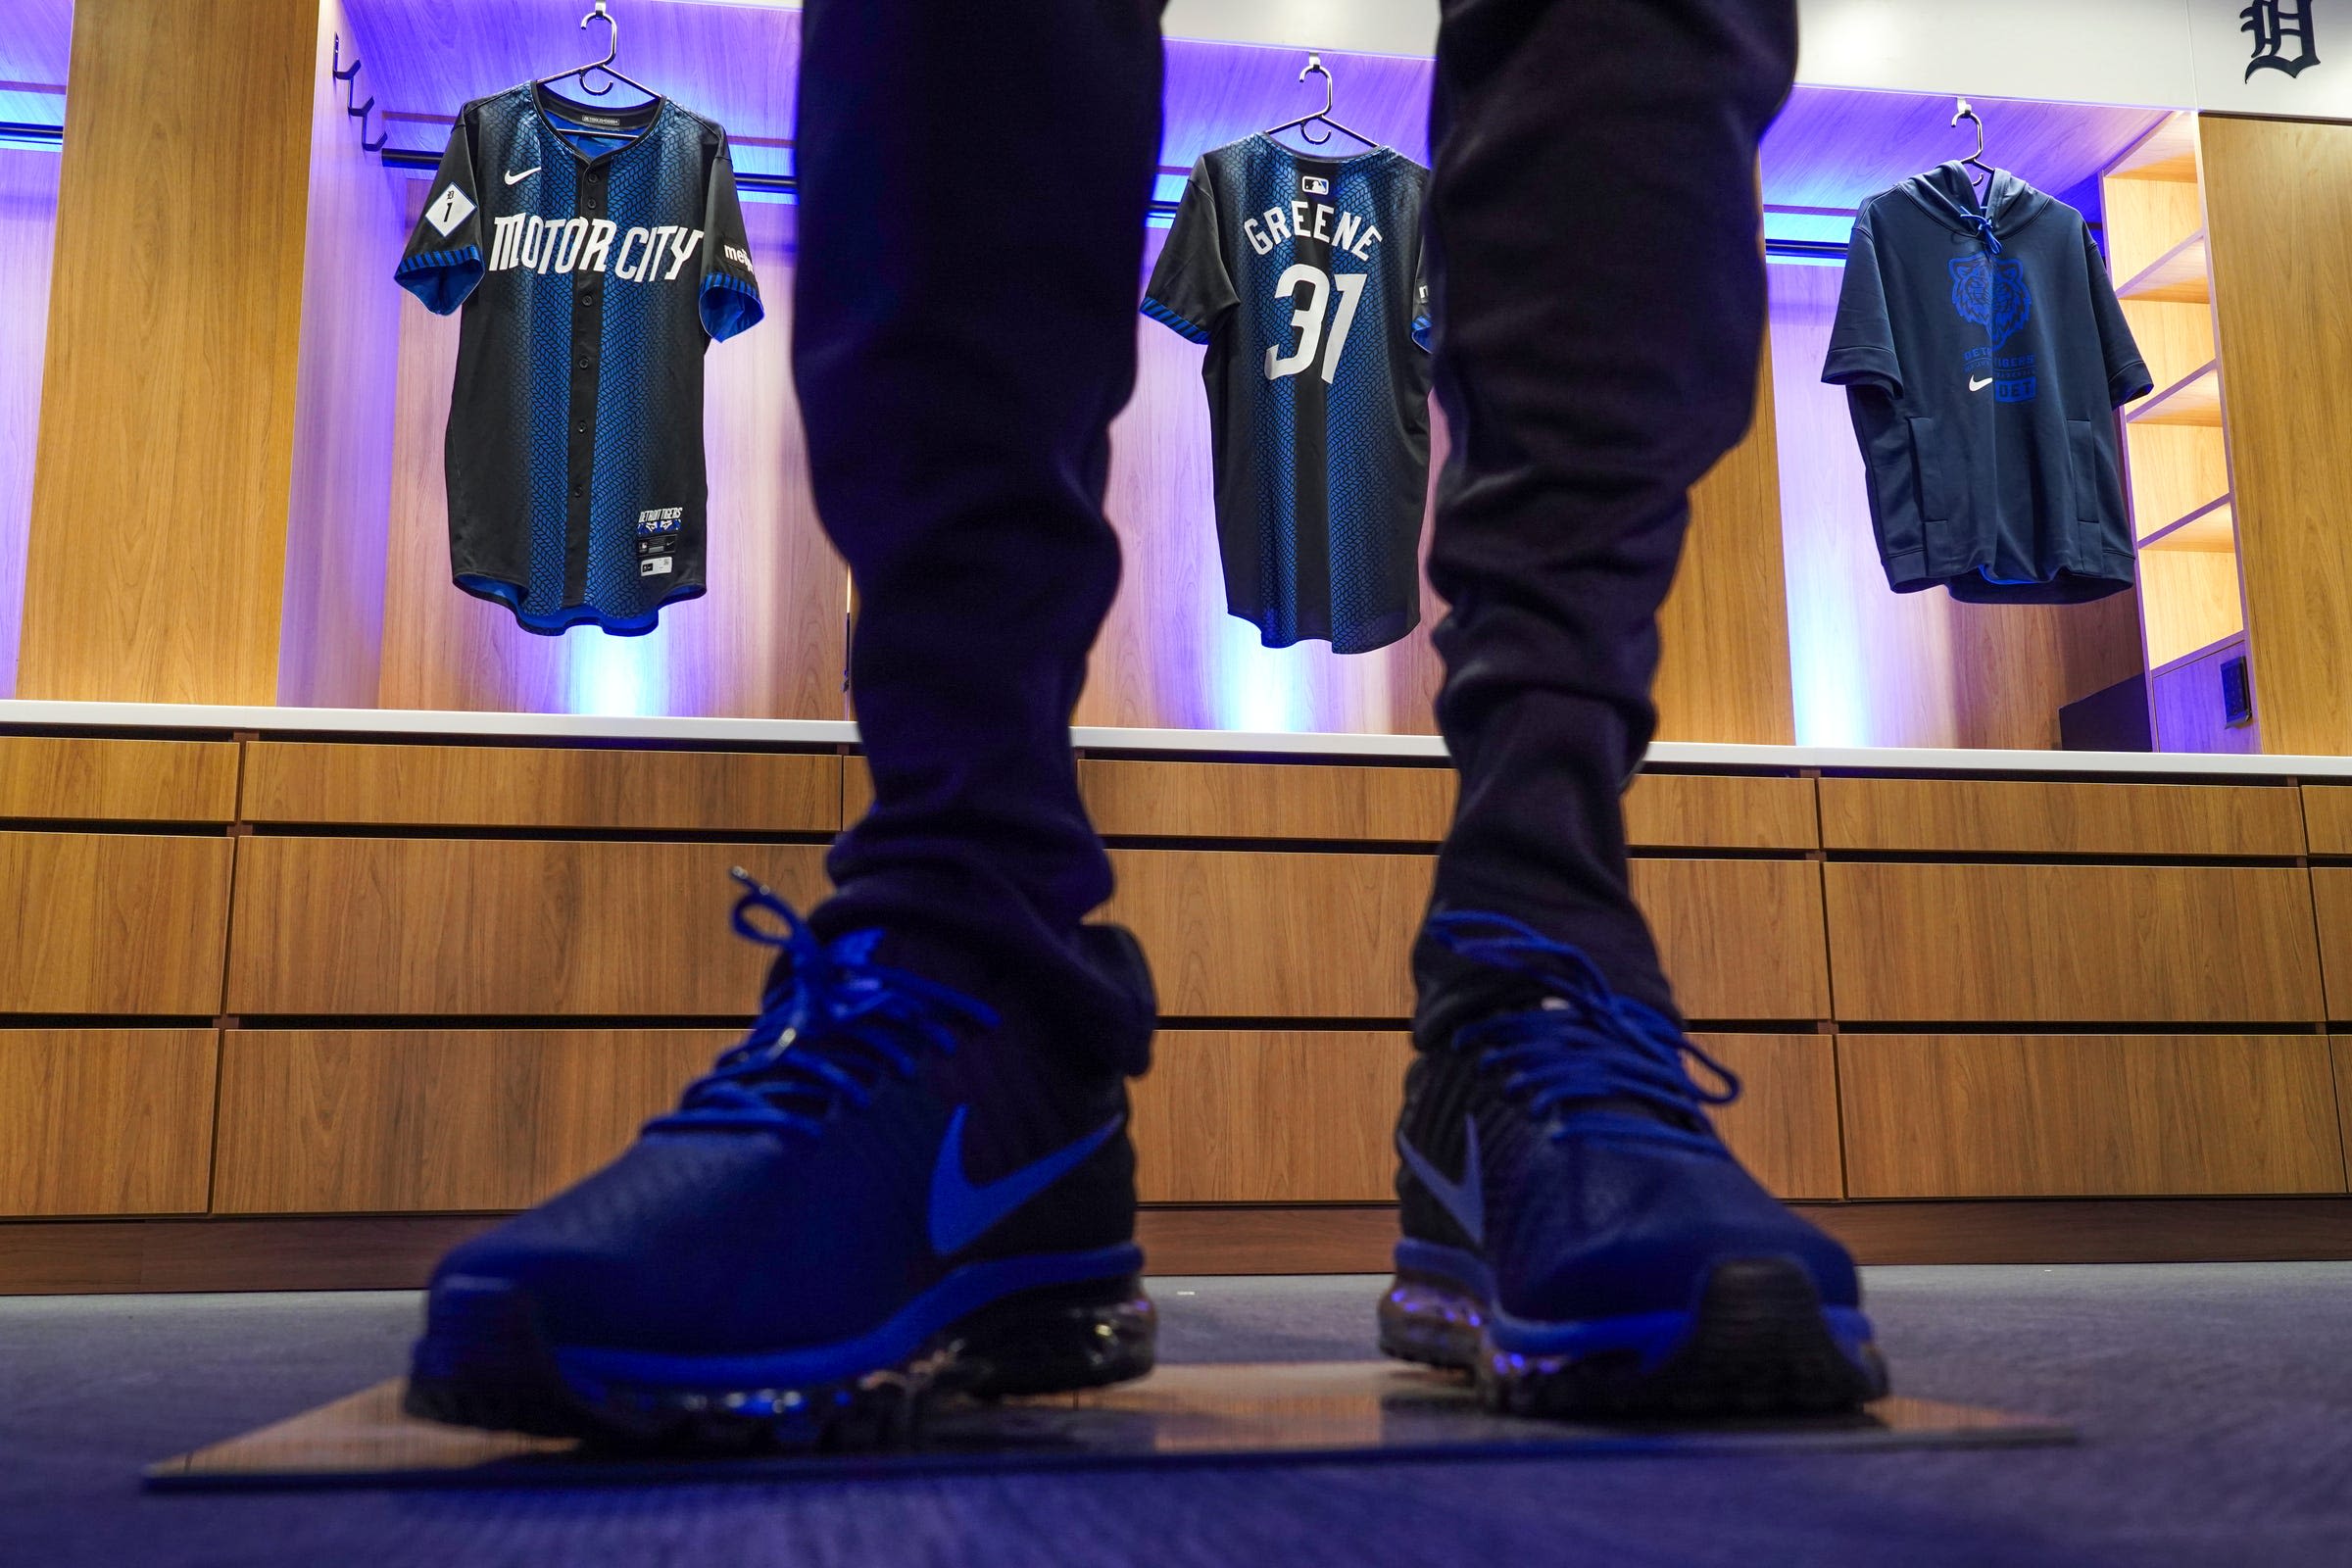 Detroit Tigers players Riley Greene, Spencer Torkelson react to City Connect uniforms